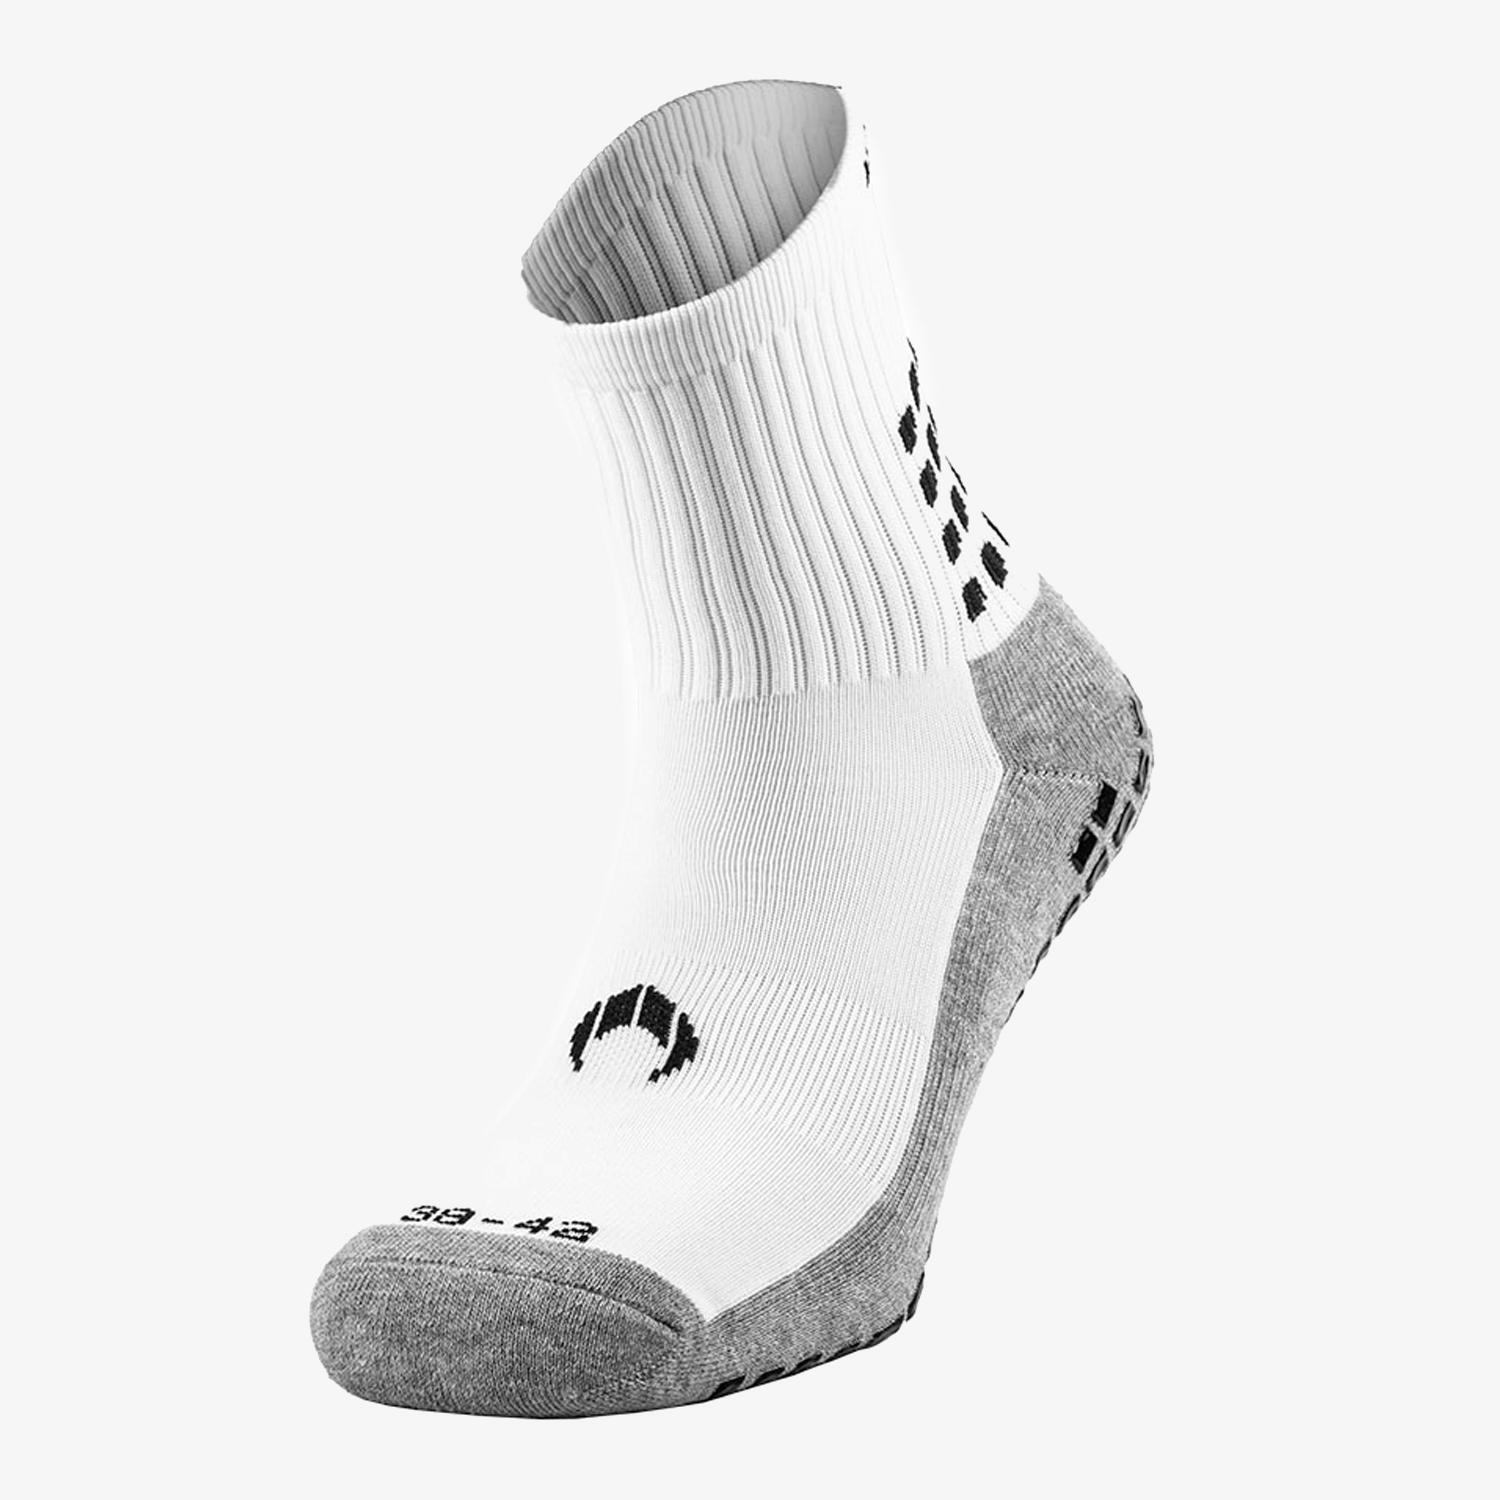 Chausettes hautes Football Ho Soccer - Blanc - Football Bas sports MKP taille M